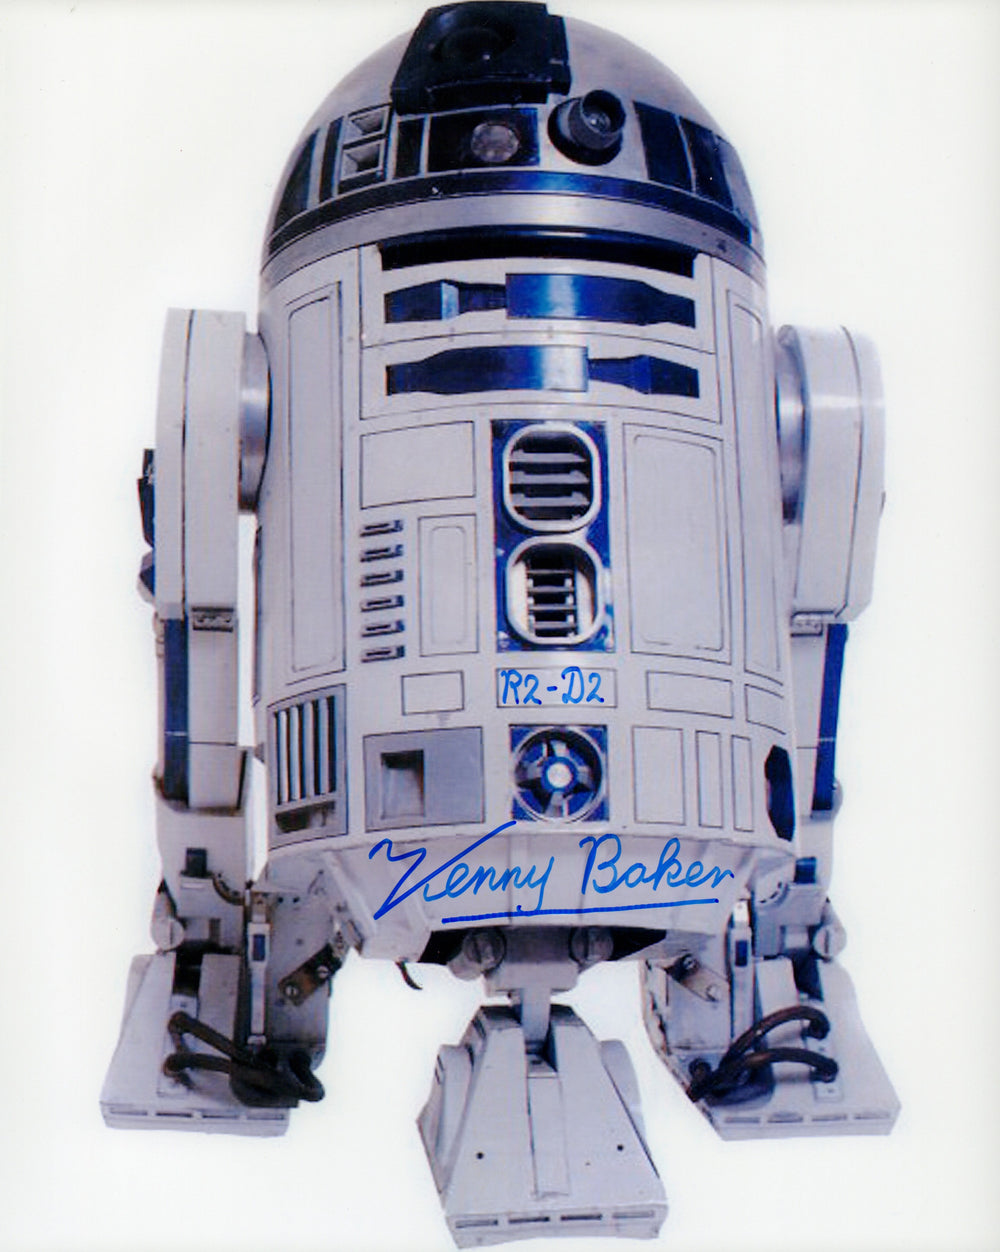 Kenny Baker as R2-D2 in Star Wars Signed 8x10 Photo